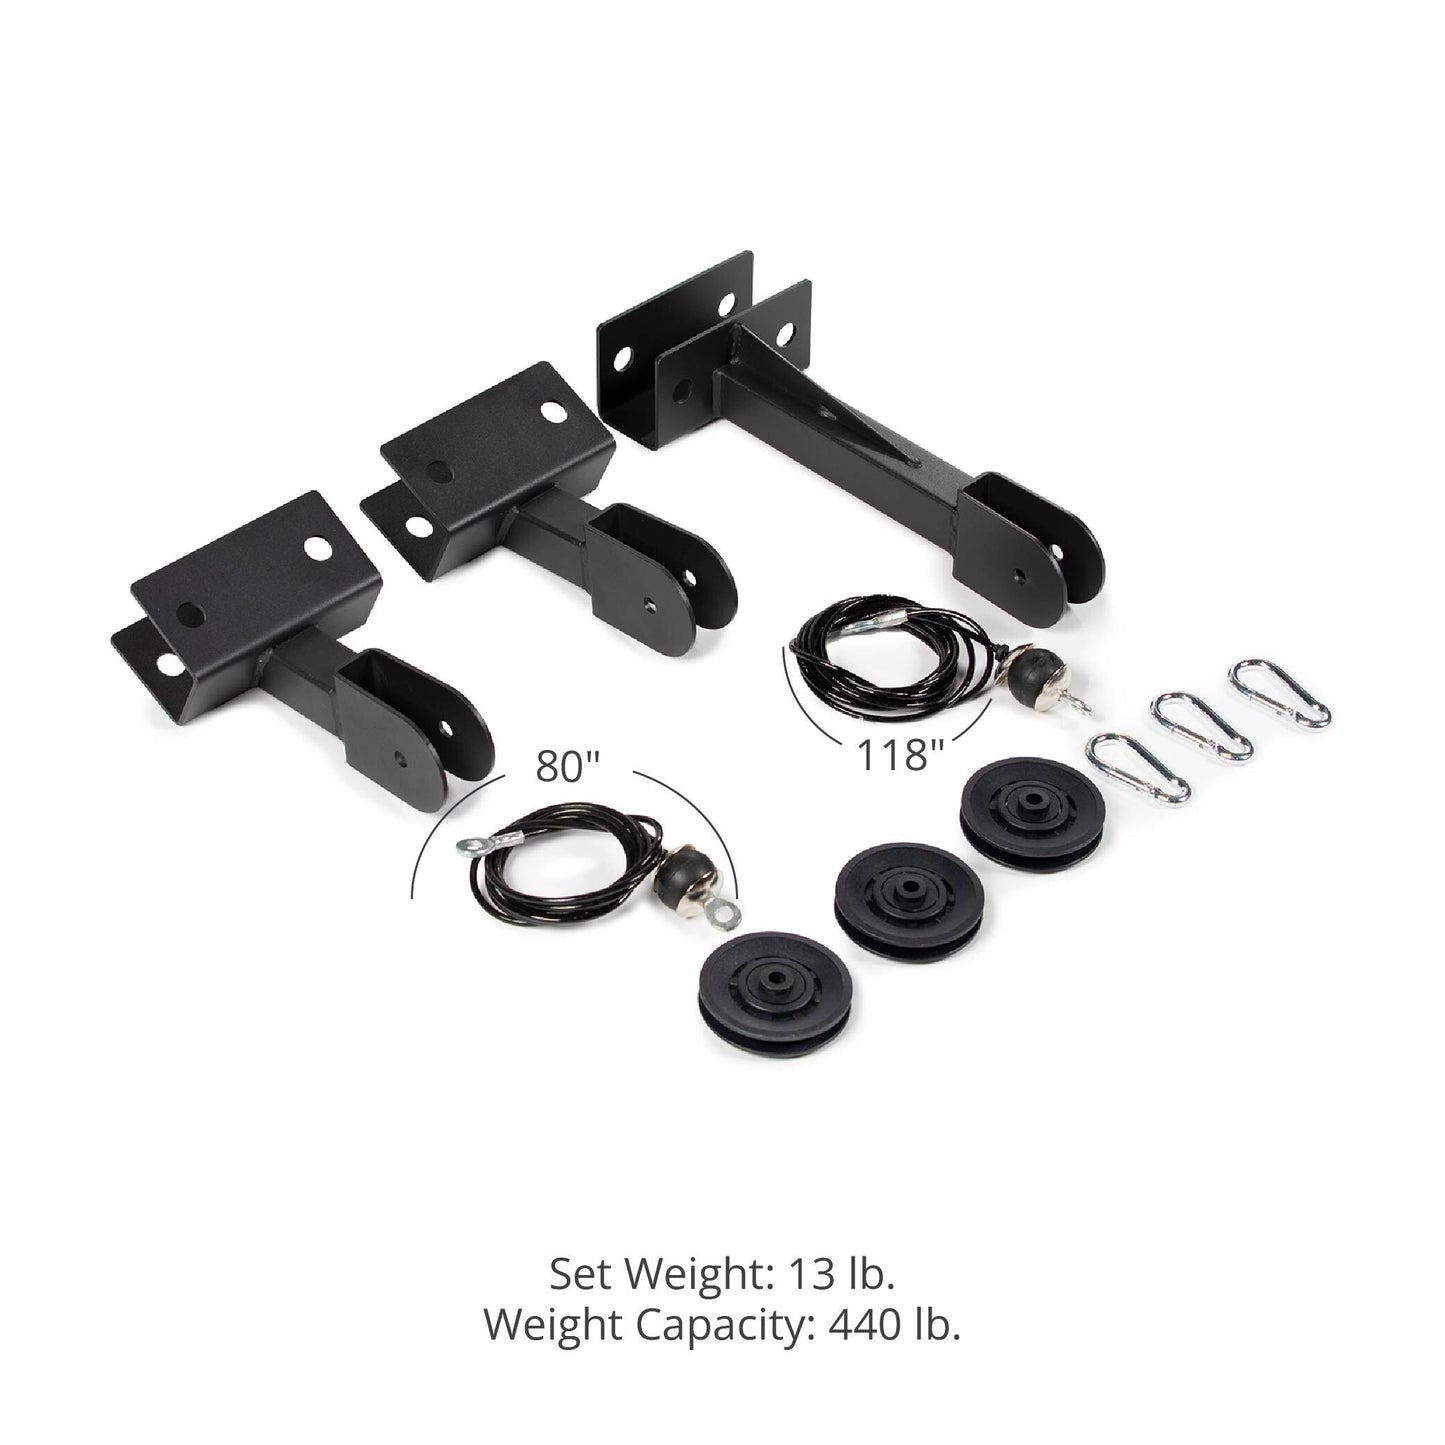 T-3 Series Complete Pulley Package - view 12